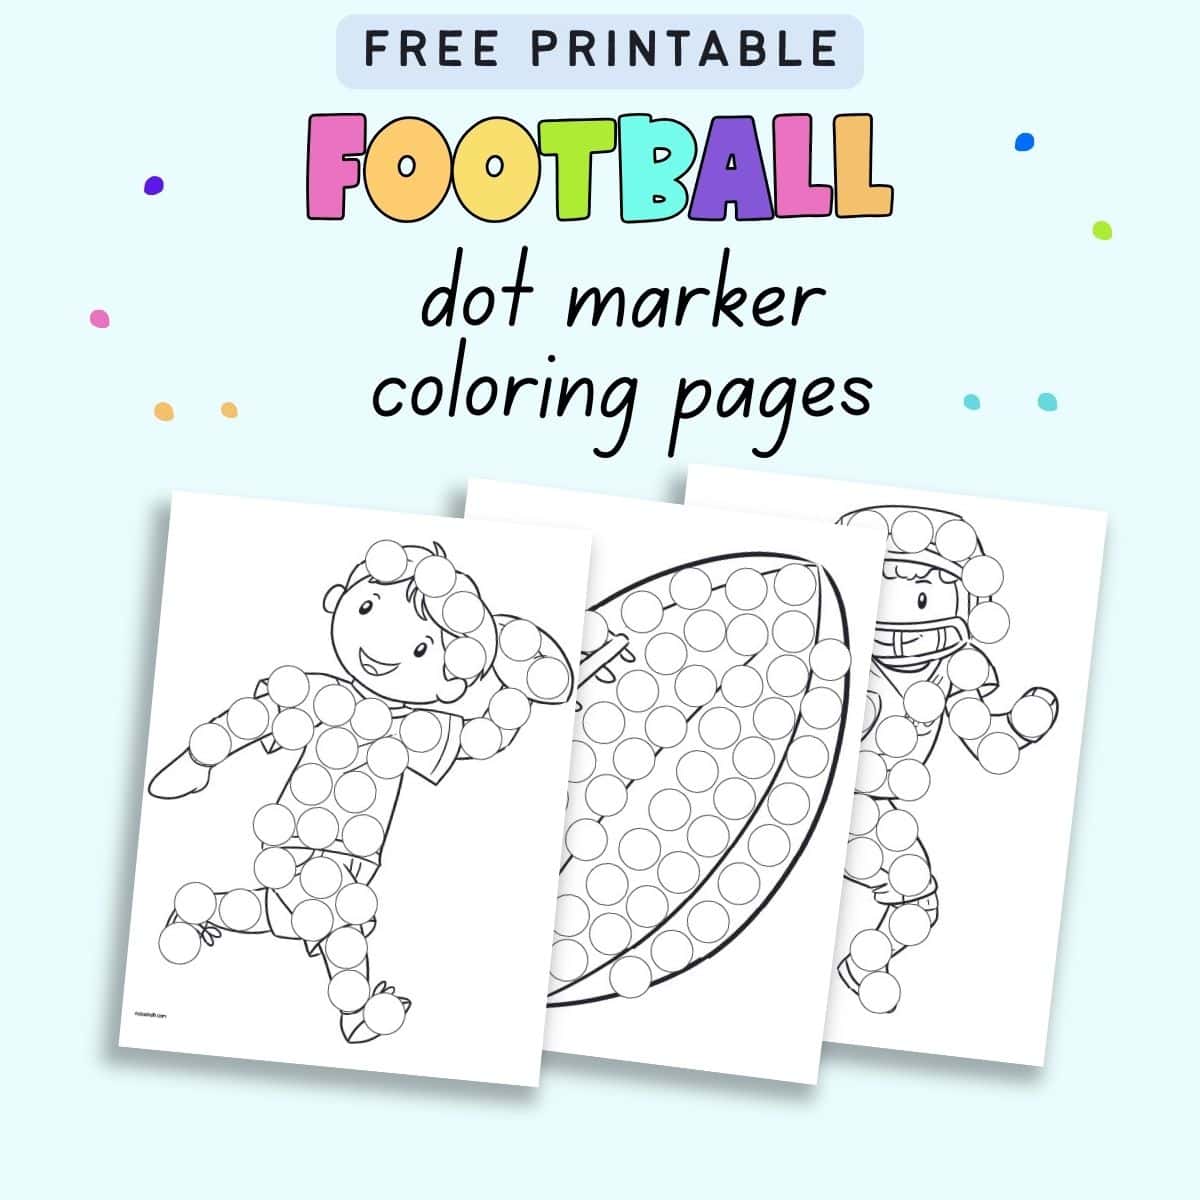 Text "Free printable football dot marker coloring pages" with a preview of three images with children playing football